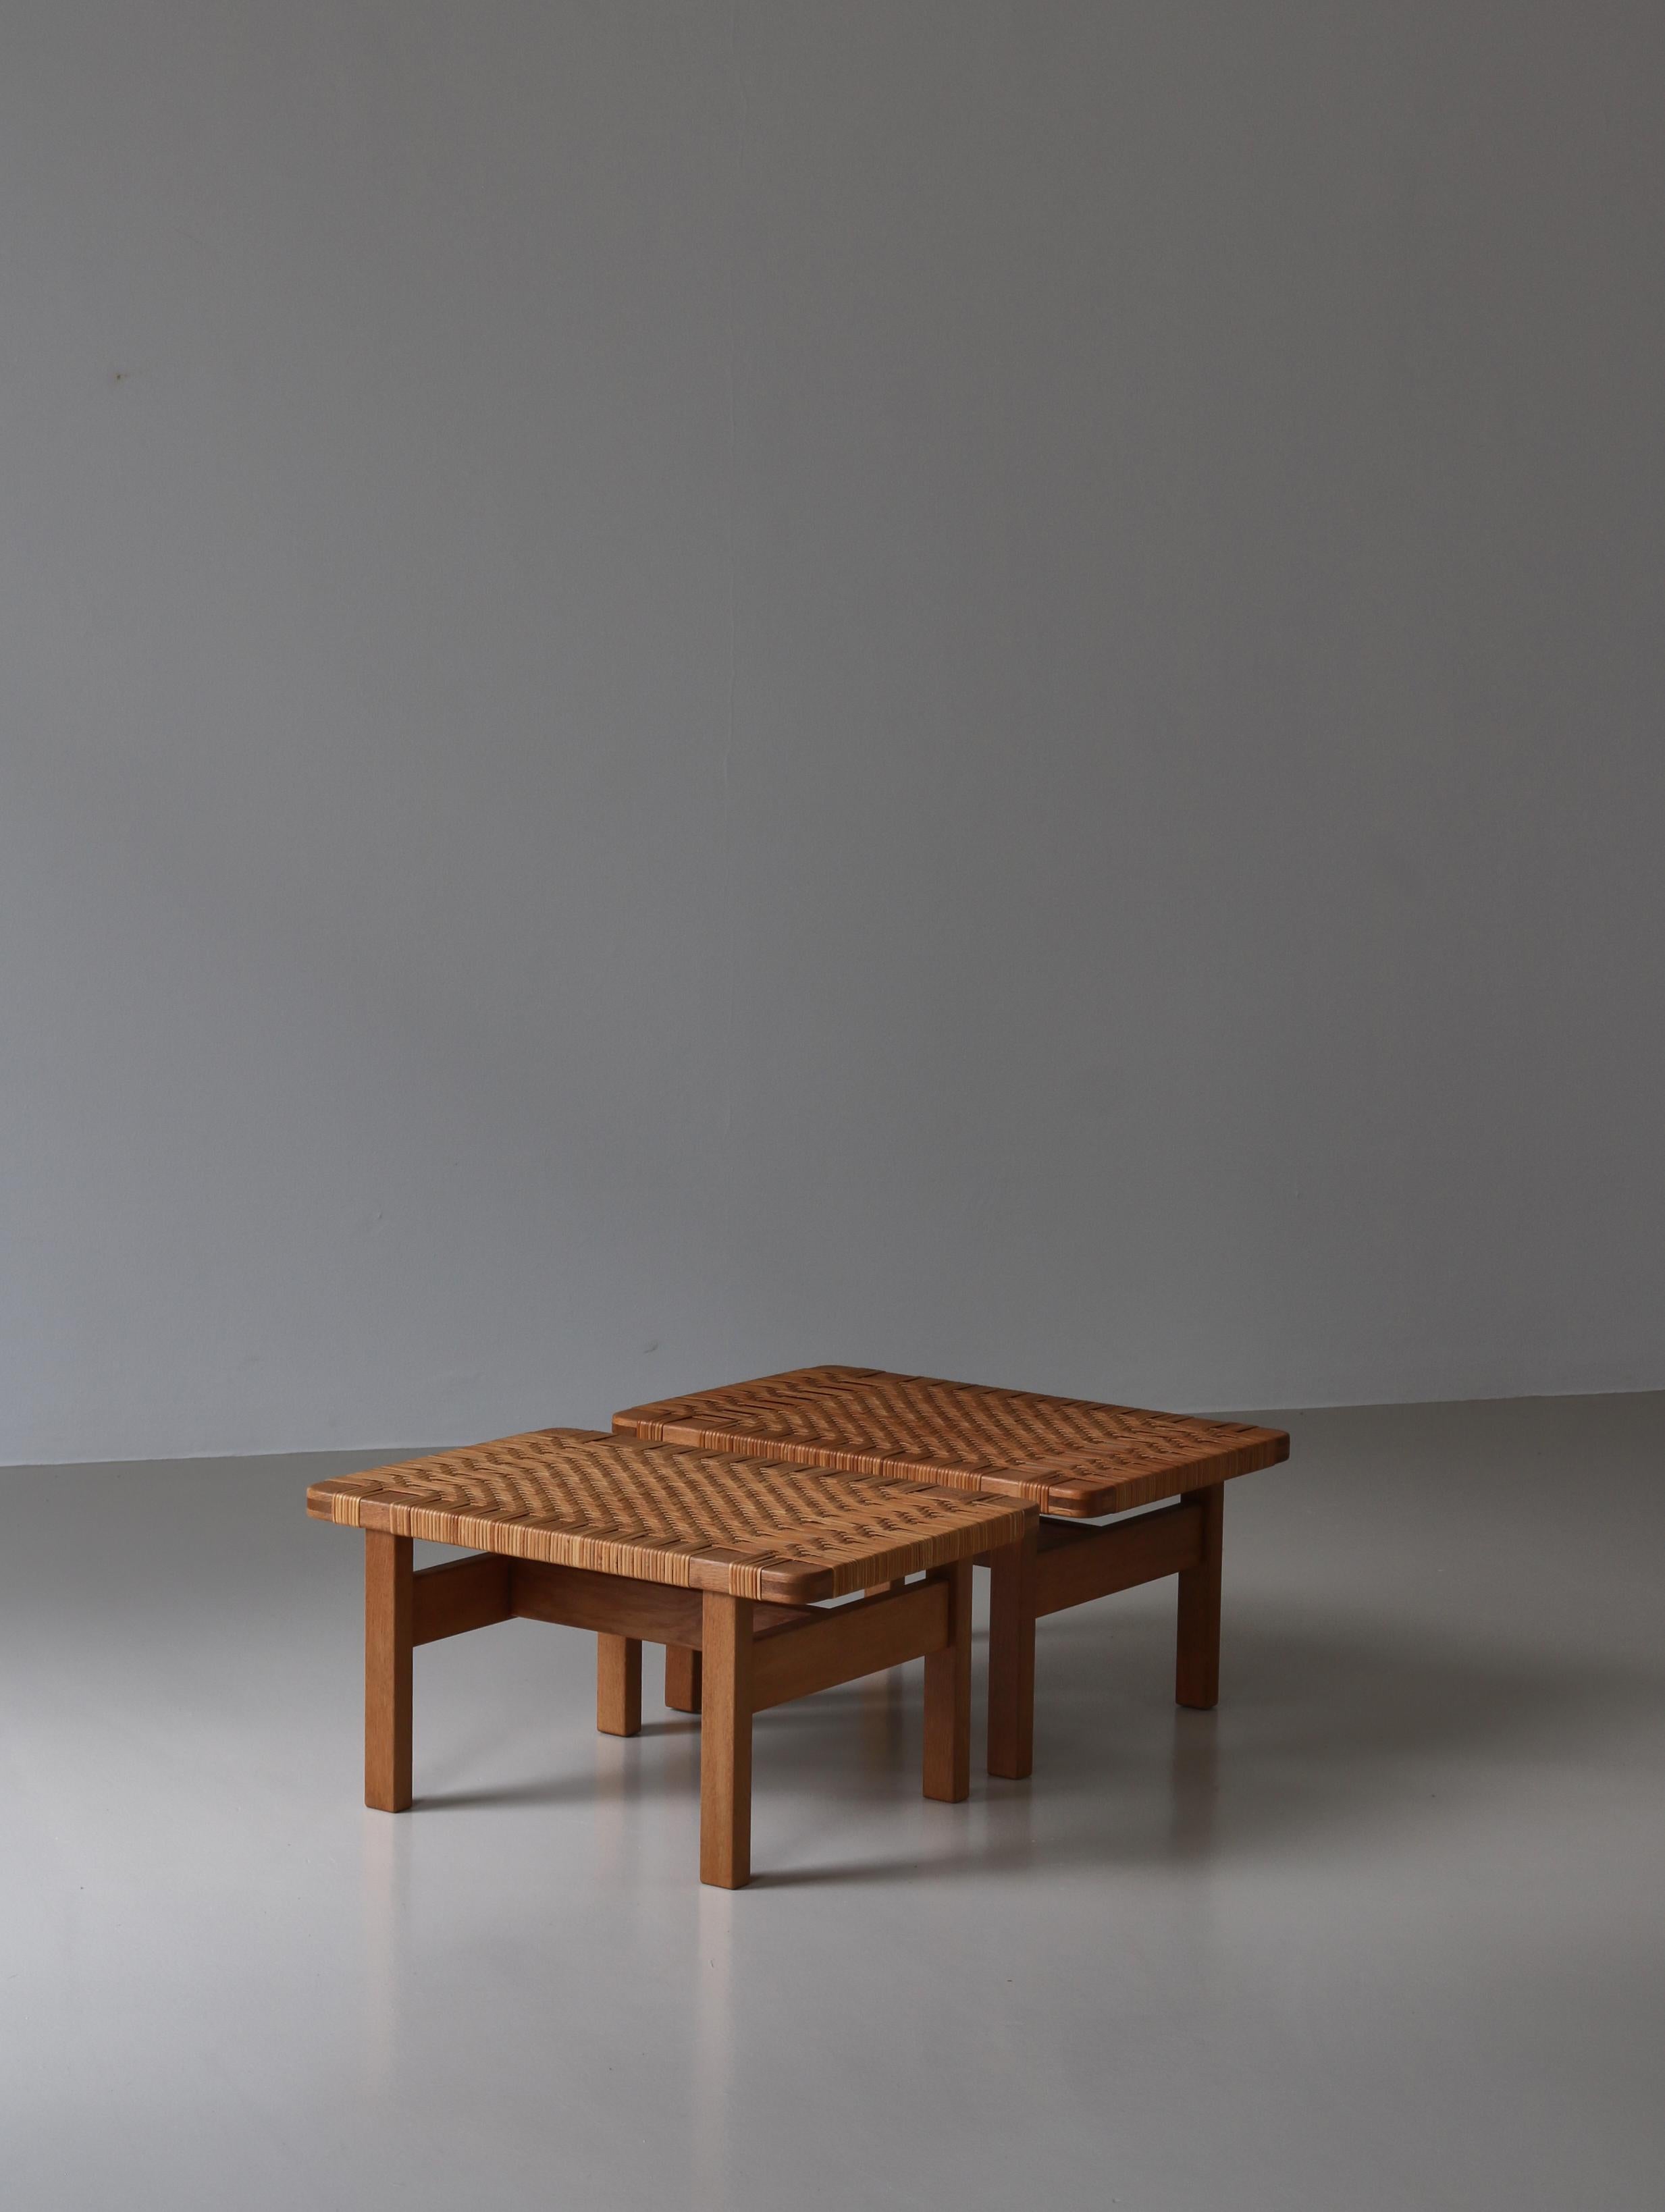 Borge Mogensen Set of Side Tables/Benches in Oak and Rattan Cane, 1960s, Denmark For Sale 5